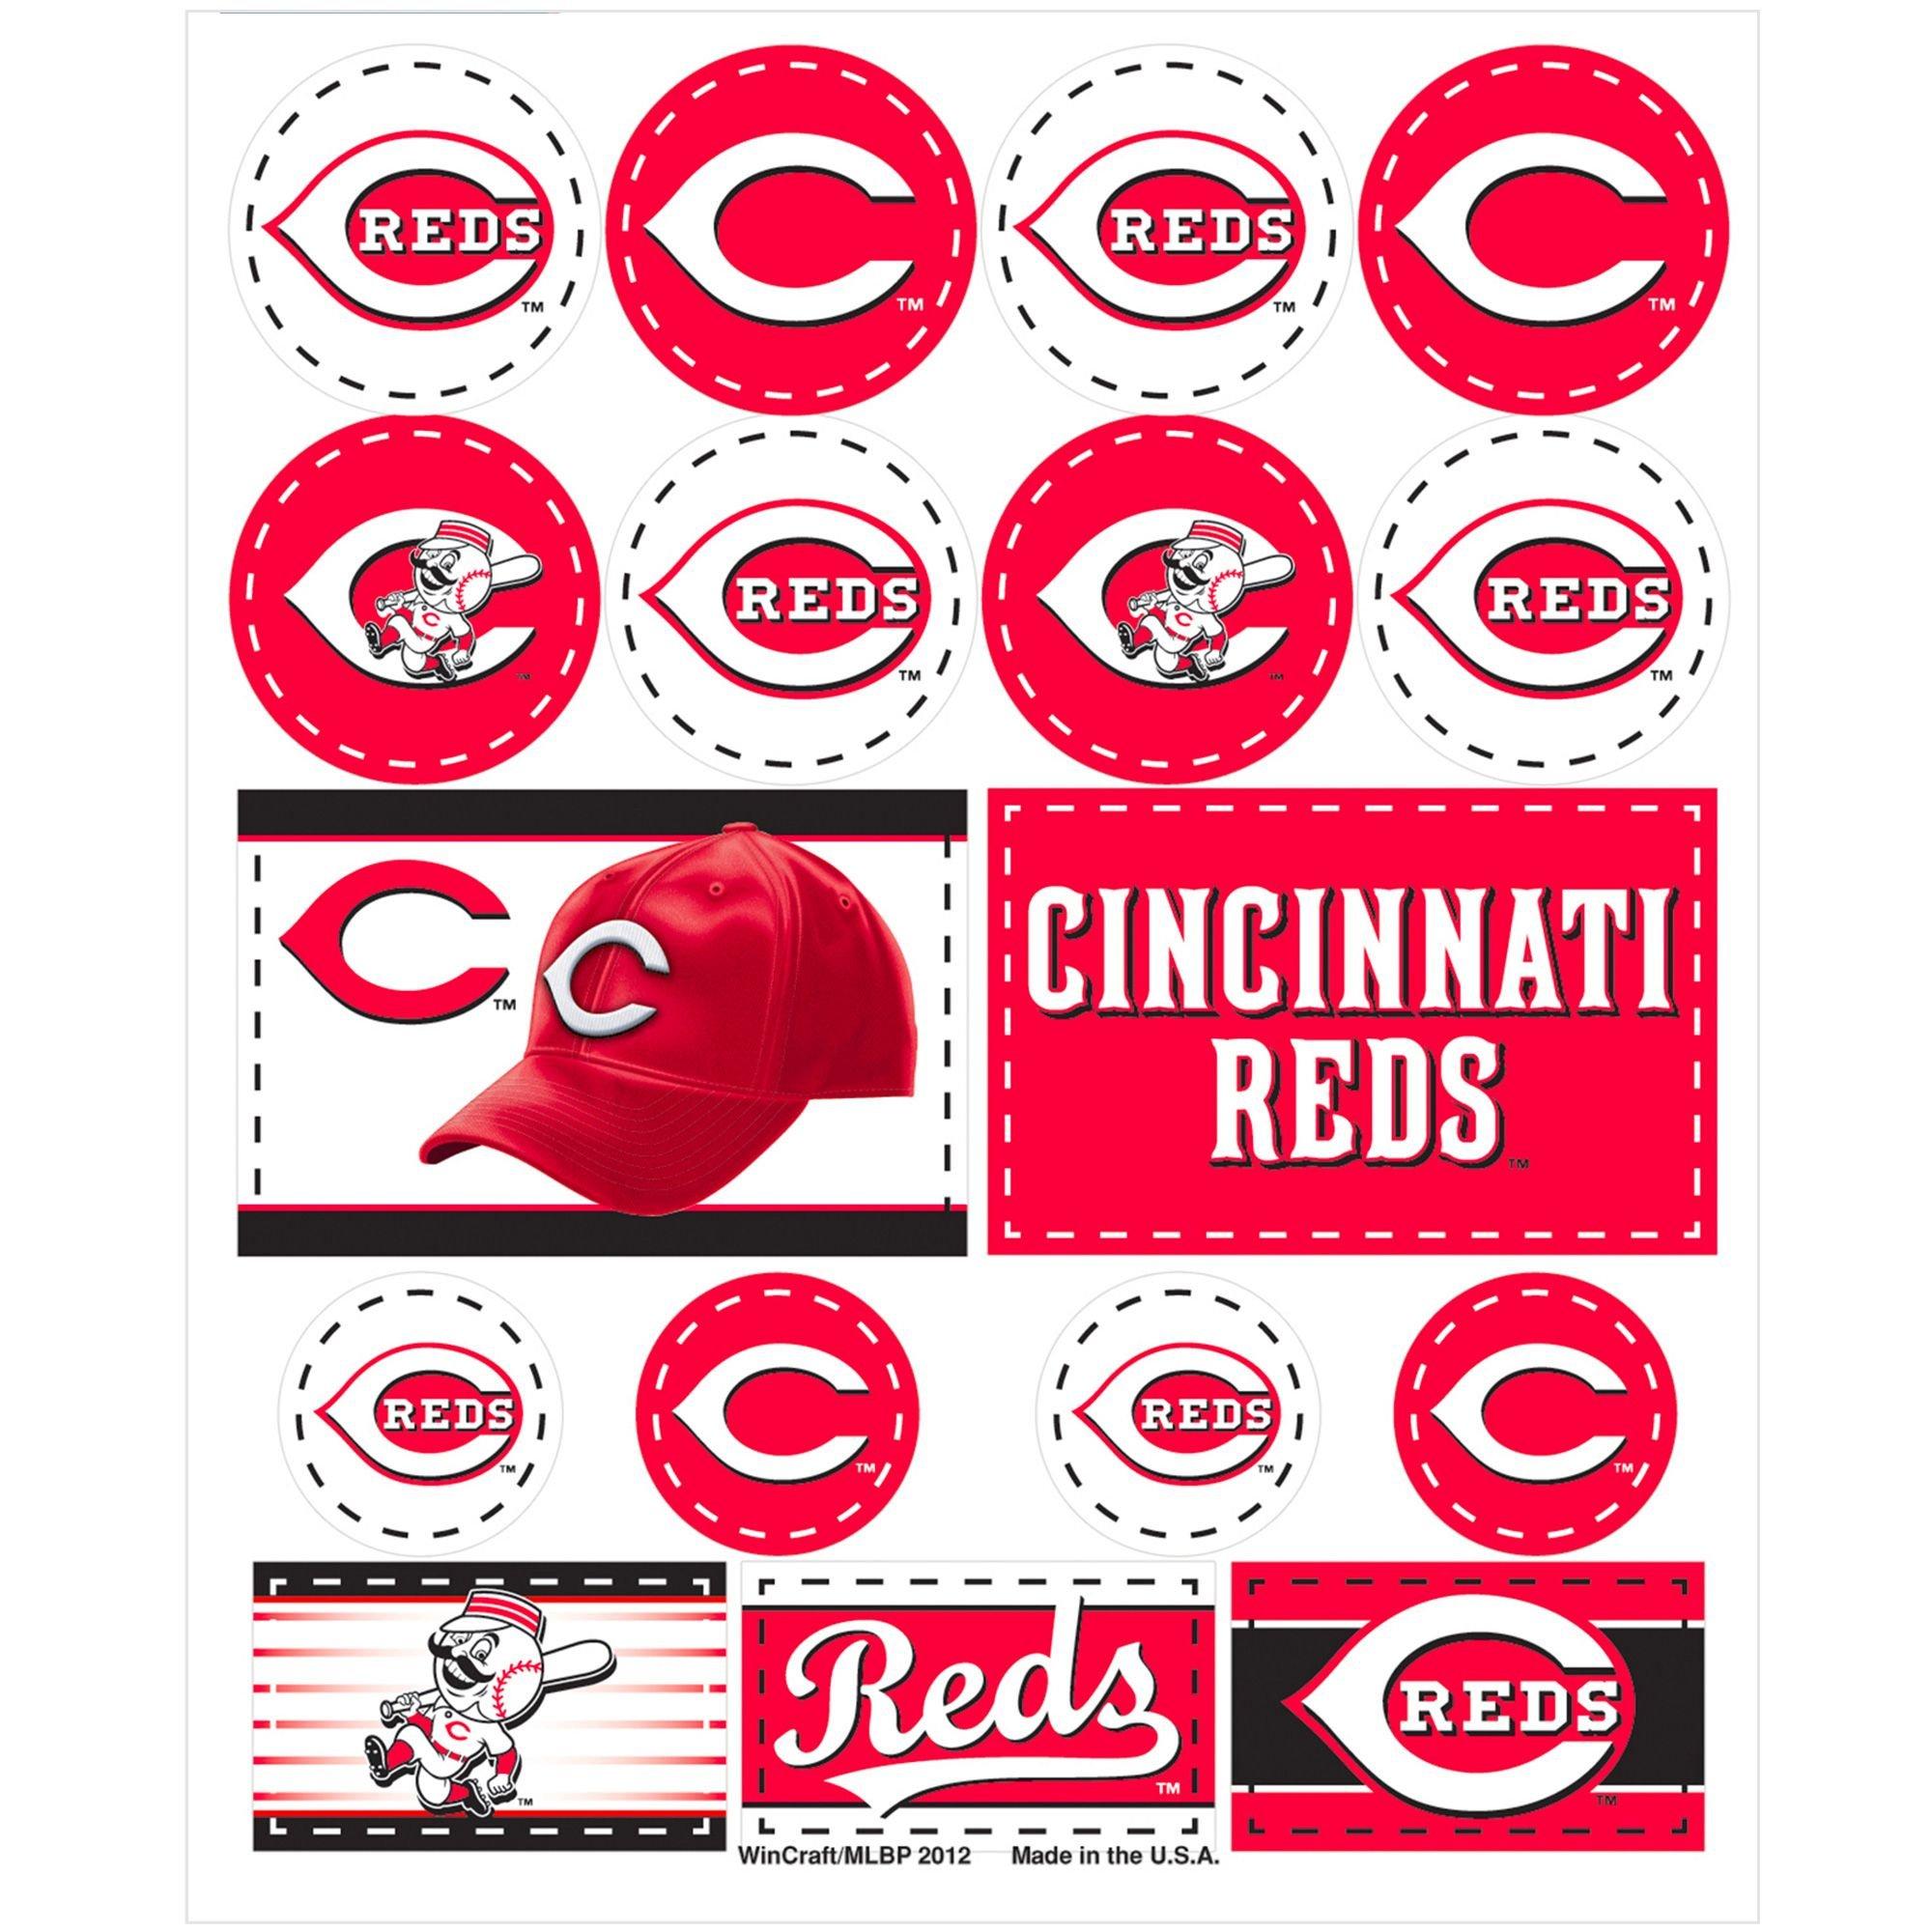 Cincinnati Reds designs, themes, templates and downloadable